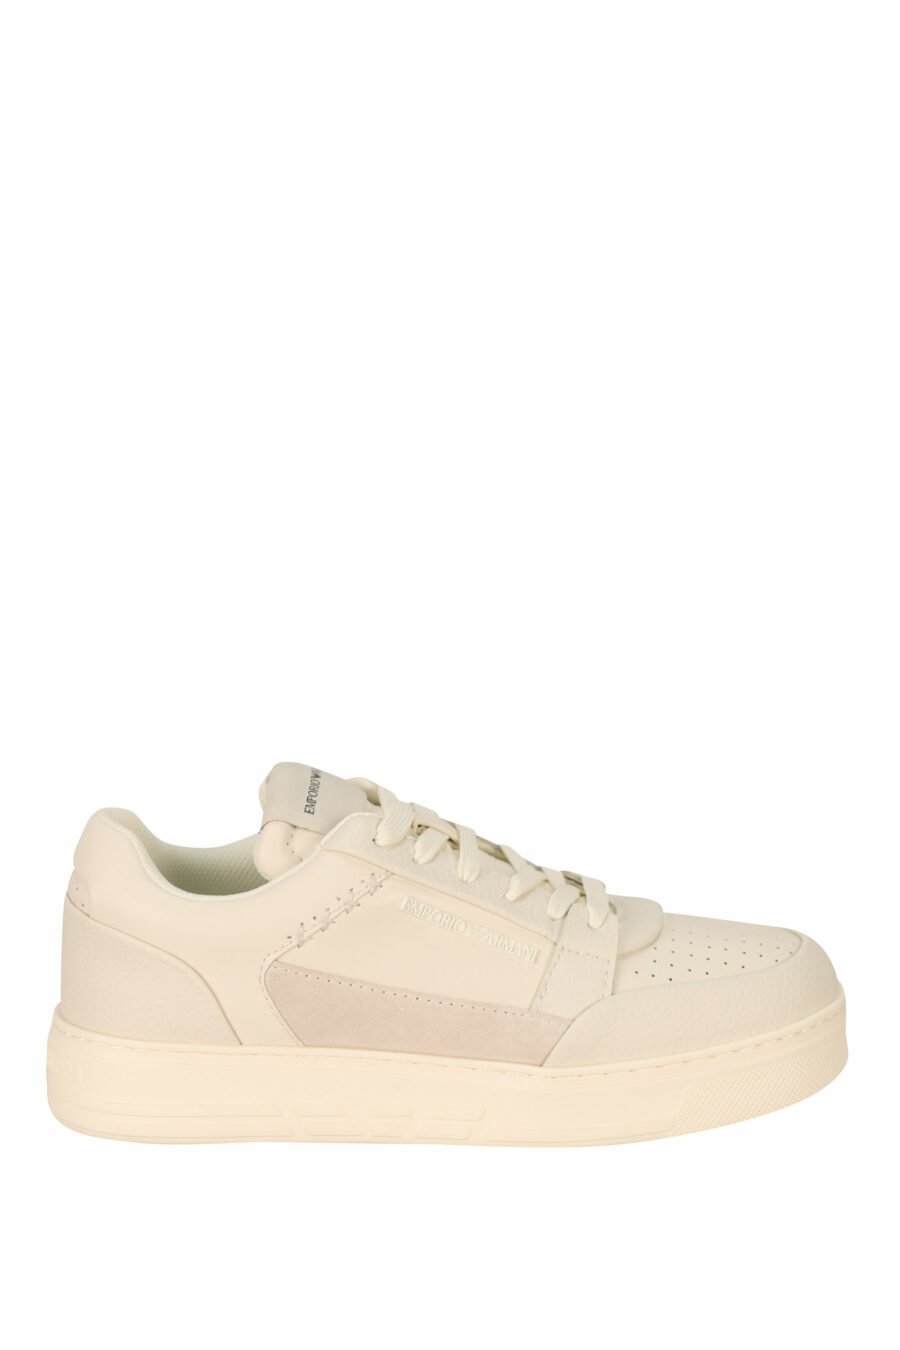 White trainers mixed with beige and rubber mini-logo - 8058947169122